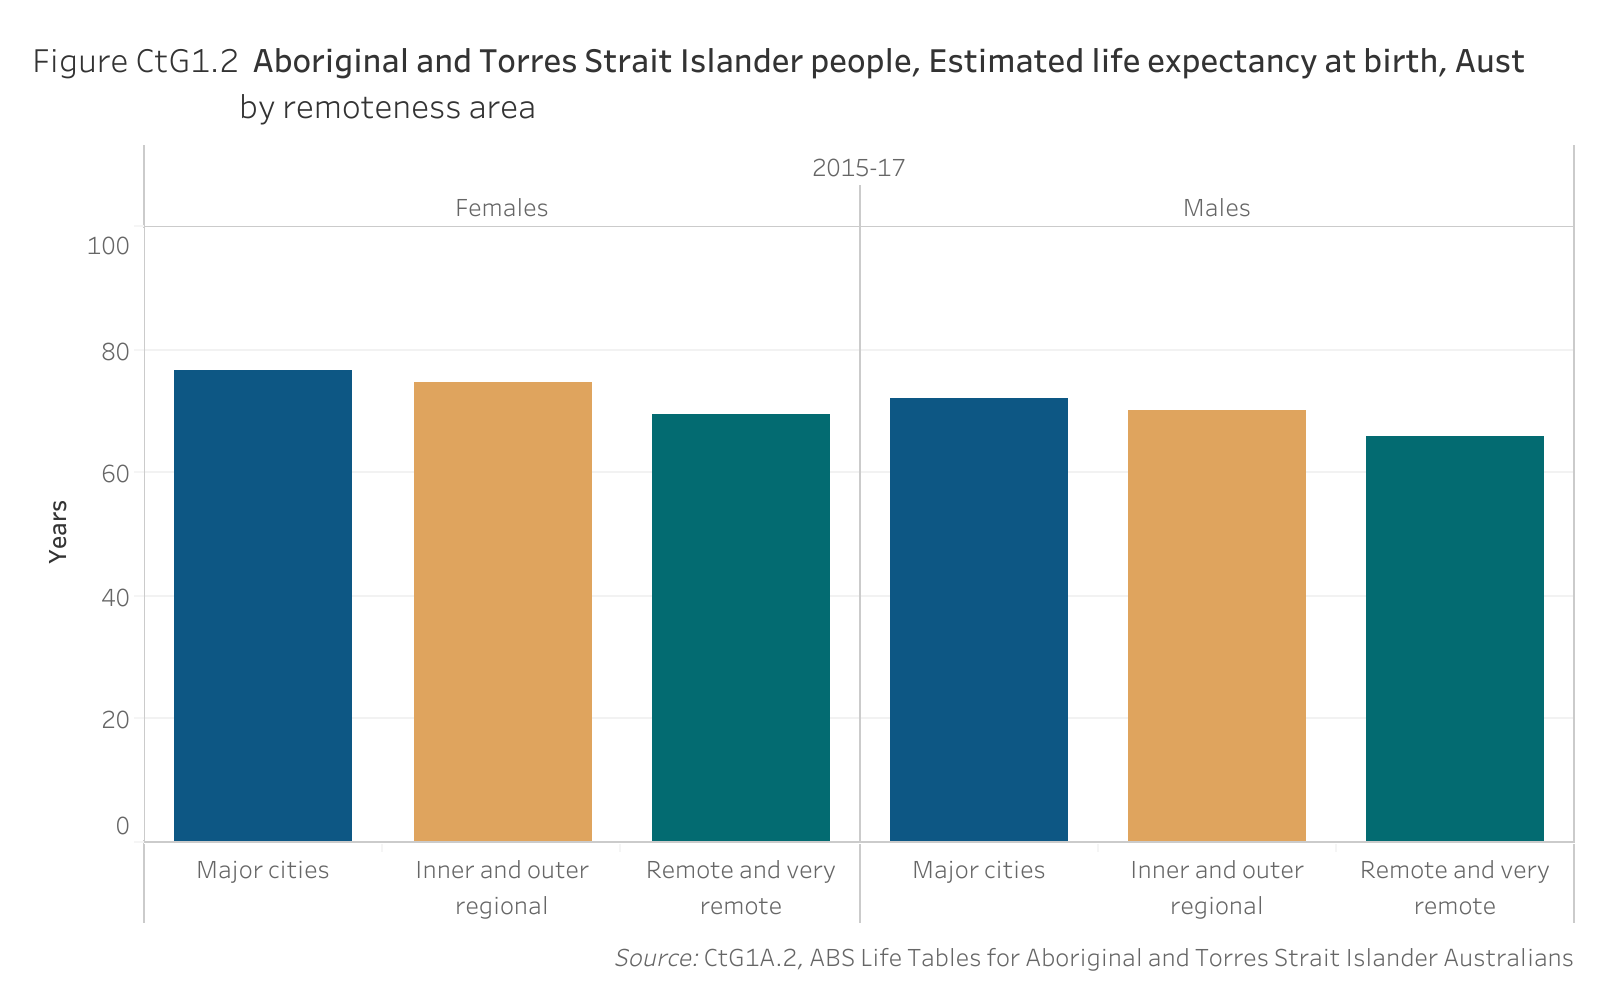 Figure CtG1.2. Bar chart showing the estimated life expectancy at birth of Aboriginal and Torres Strait Islander people in Australia in 2015-17, by sex and by remoteness area. Data table of figure CtG1.2 is below.